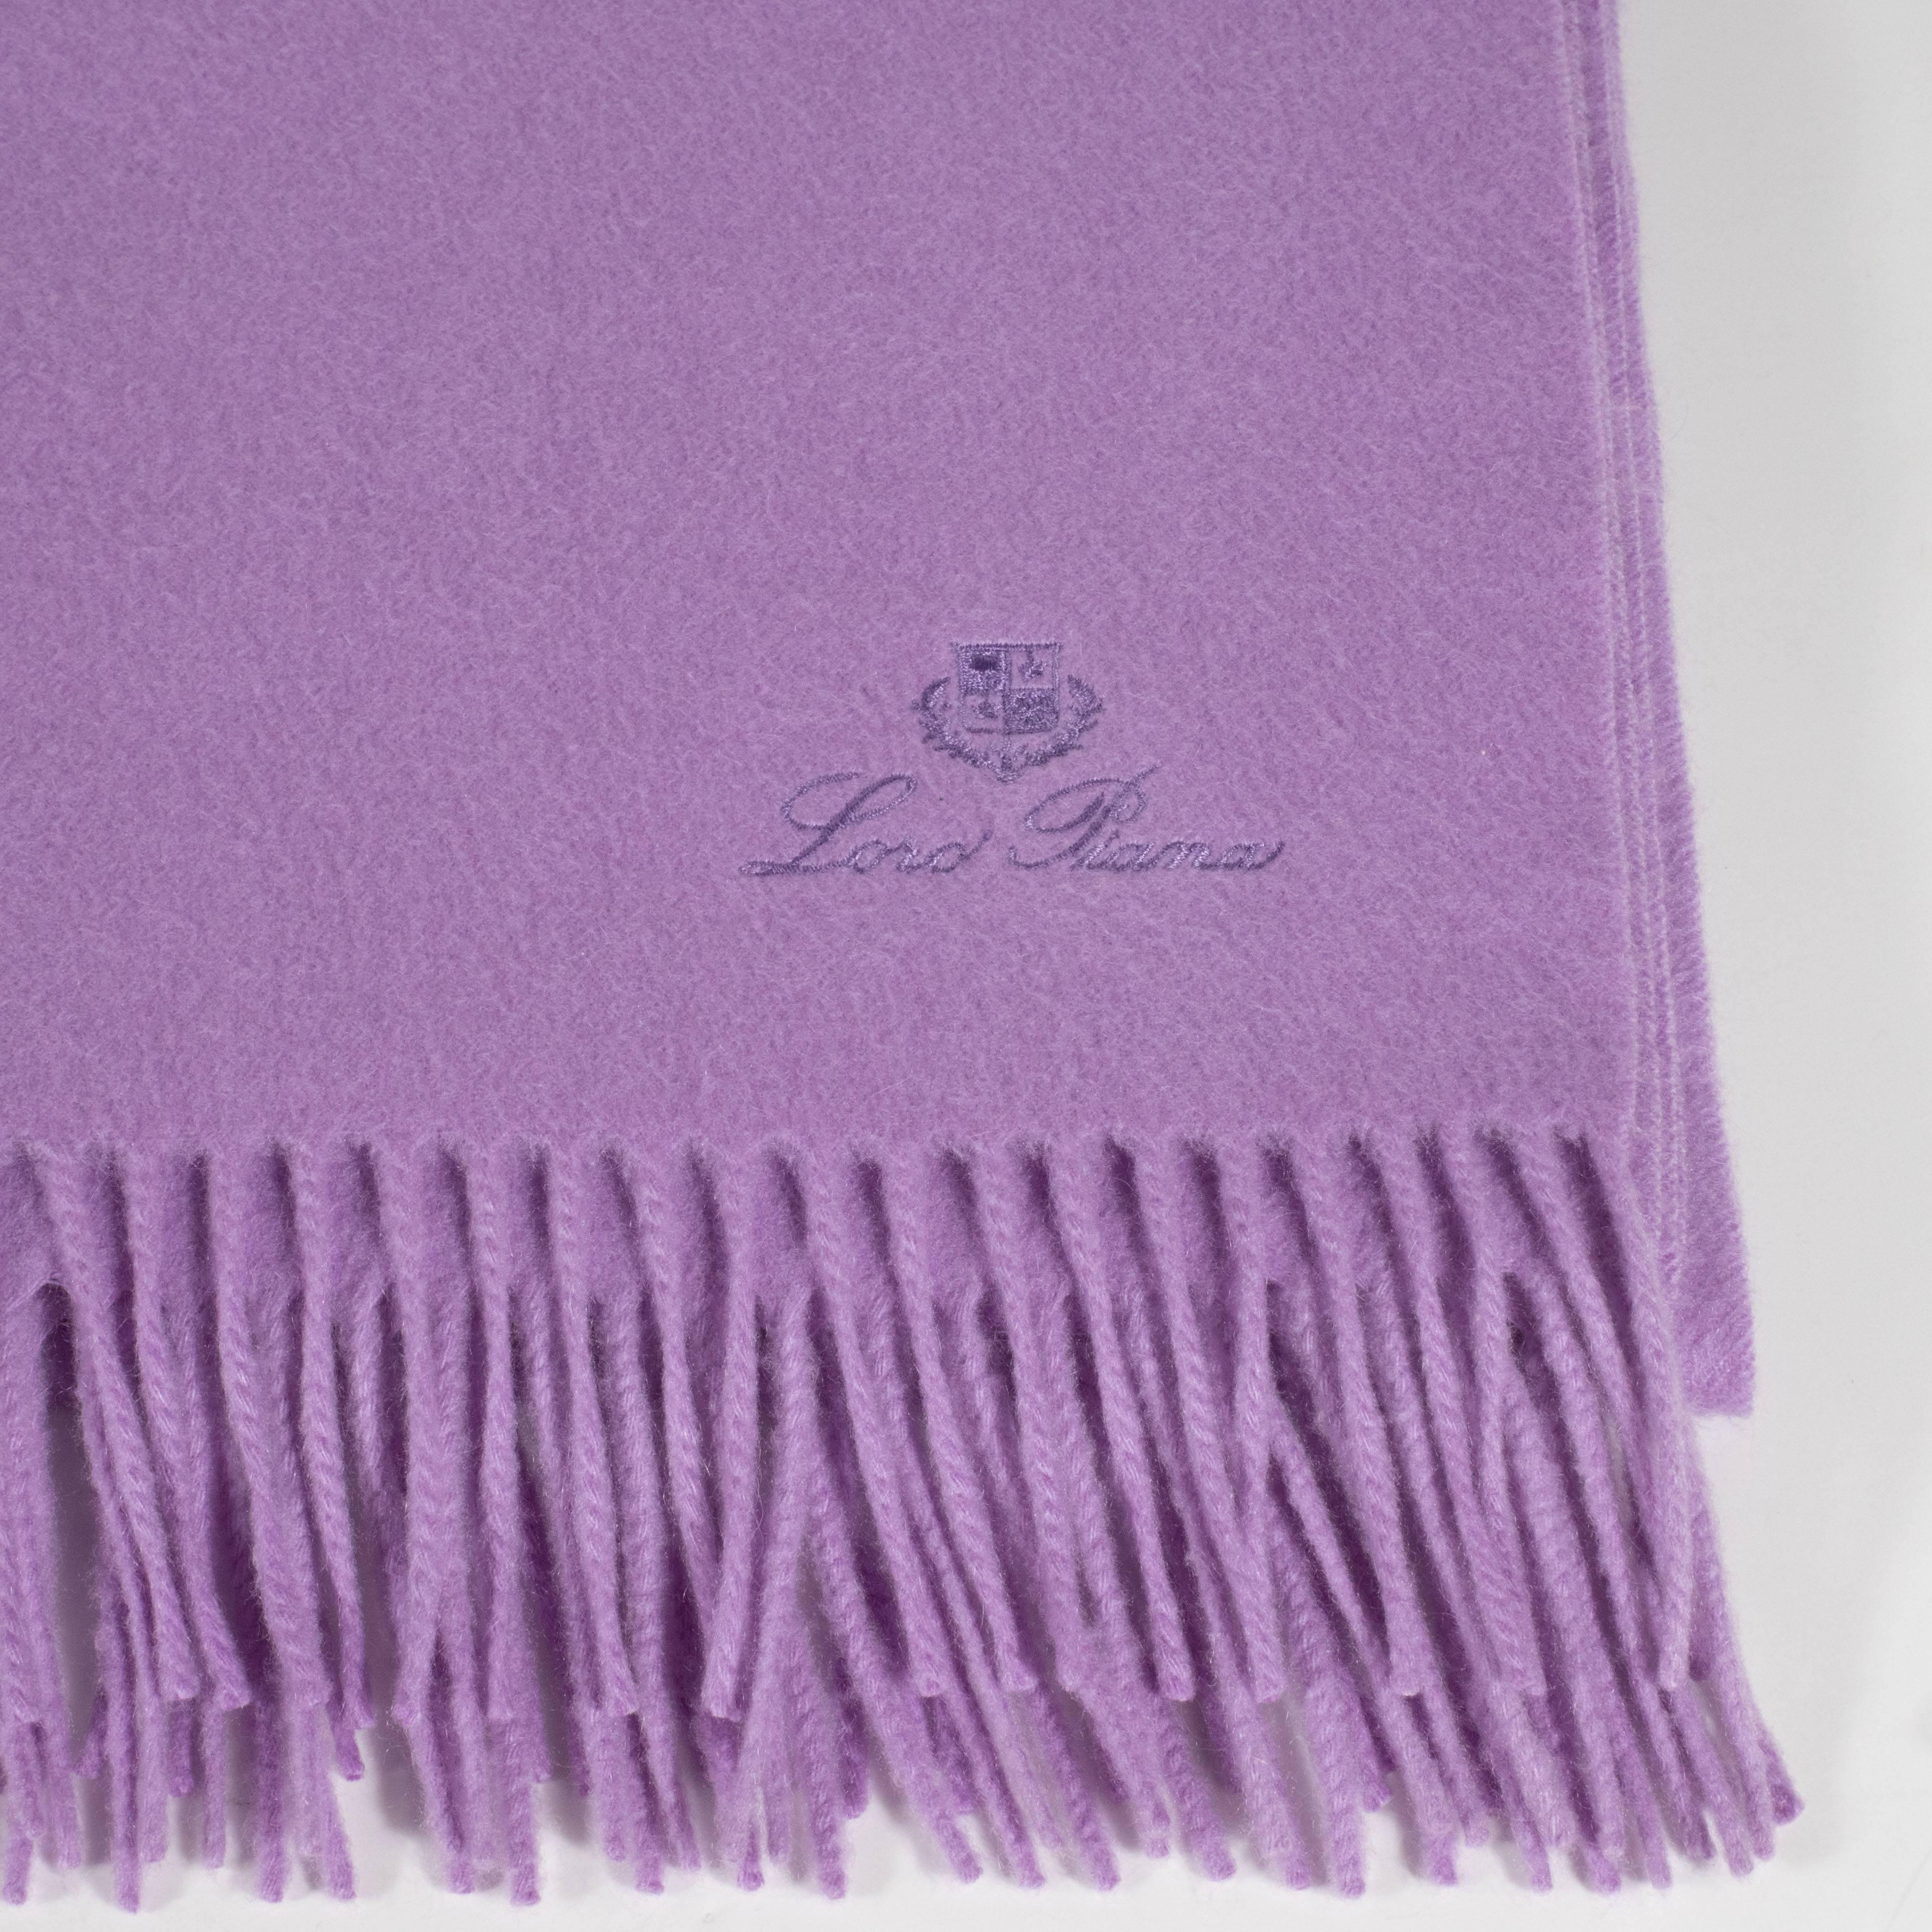 This Loro Piana throw consists of 100% cashmere in a stunning lilac hue. Sourced from the under fleeces of Hircus goats who roam the plains of Mongolia and Northern China, this cashmere is considered the finest in the world. Loro Piana represents